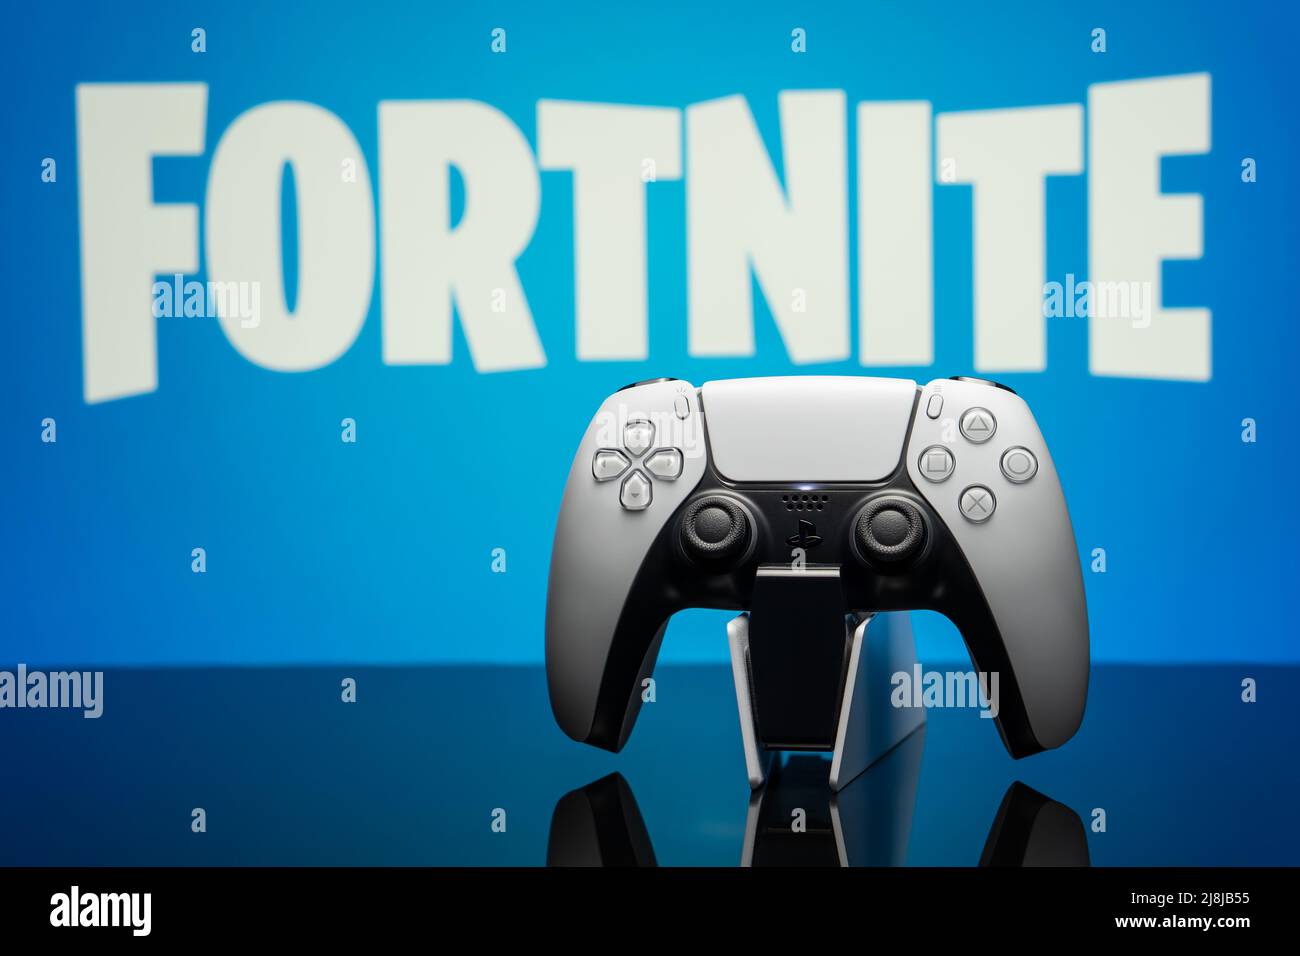 Assam, India - July 28, 2020 : Fortnite a Online Game Developed by Epic  Games. Editorial Photography - Image of business, assam: 192202087